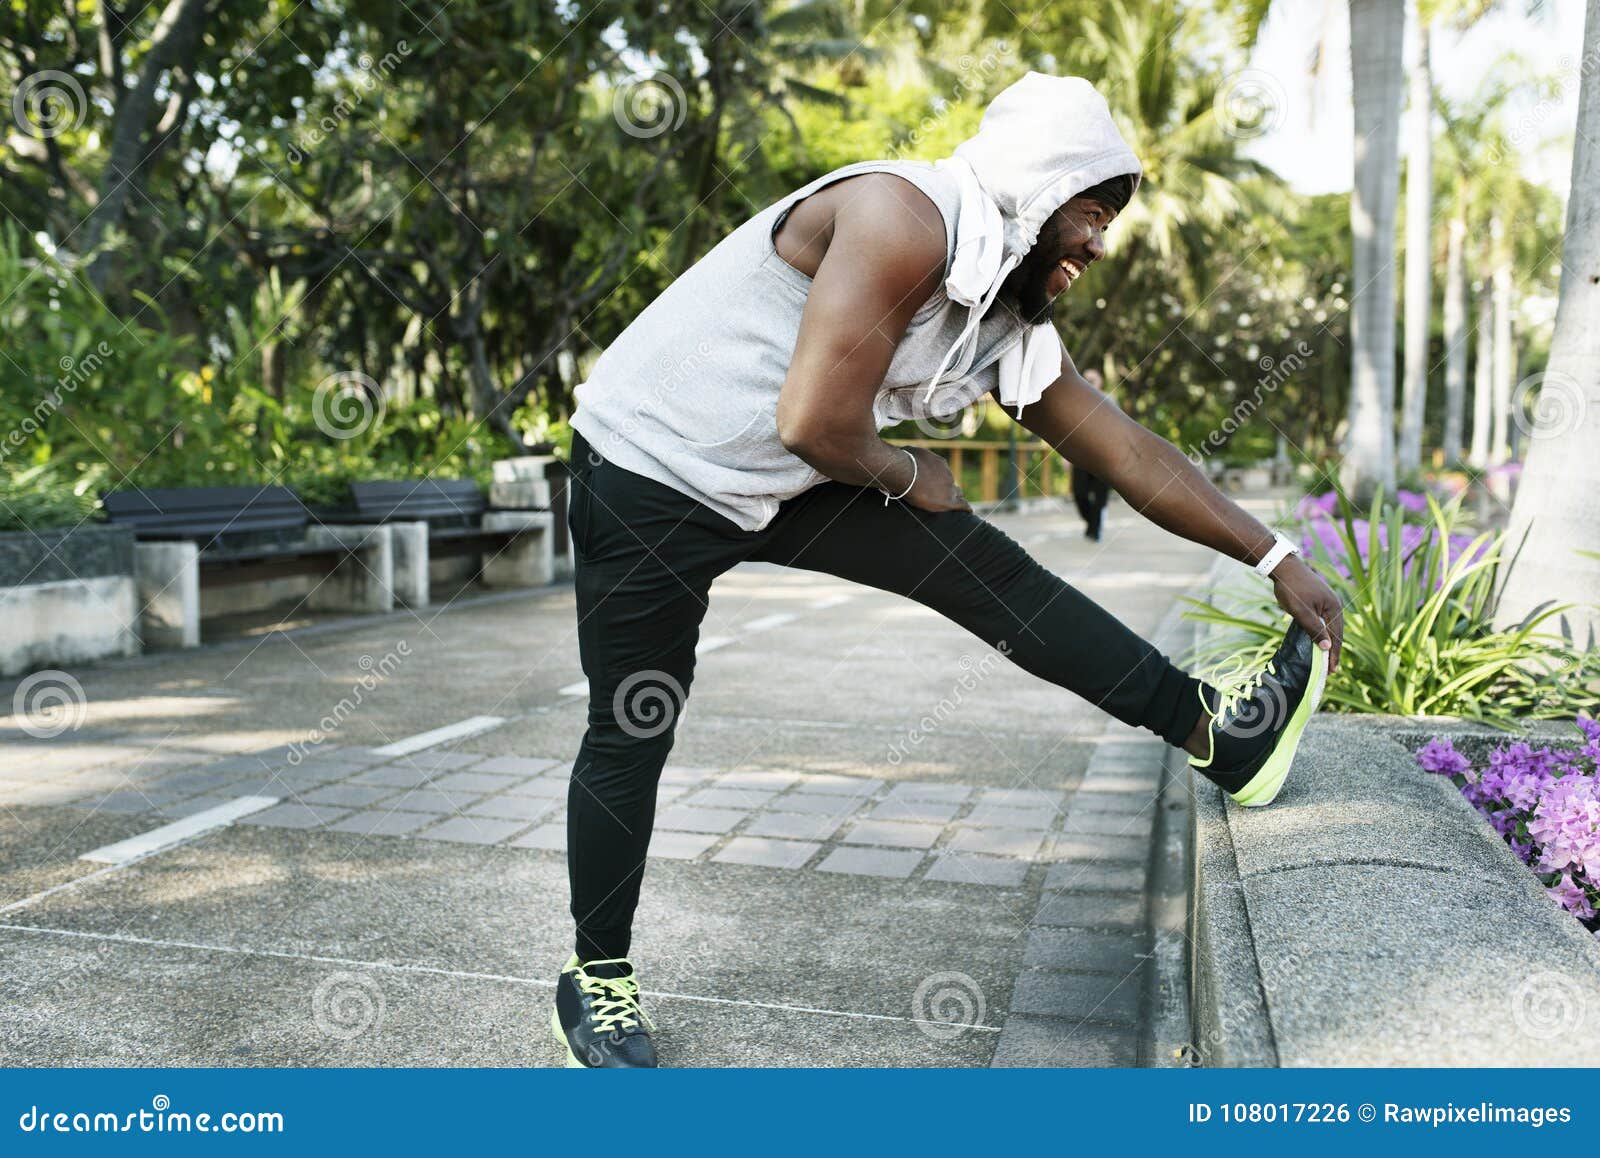 african descent man stretching at the park